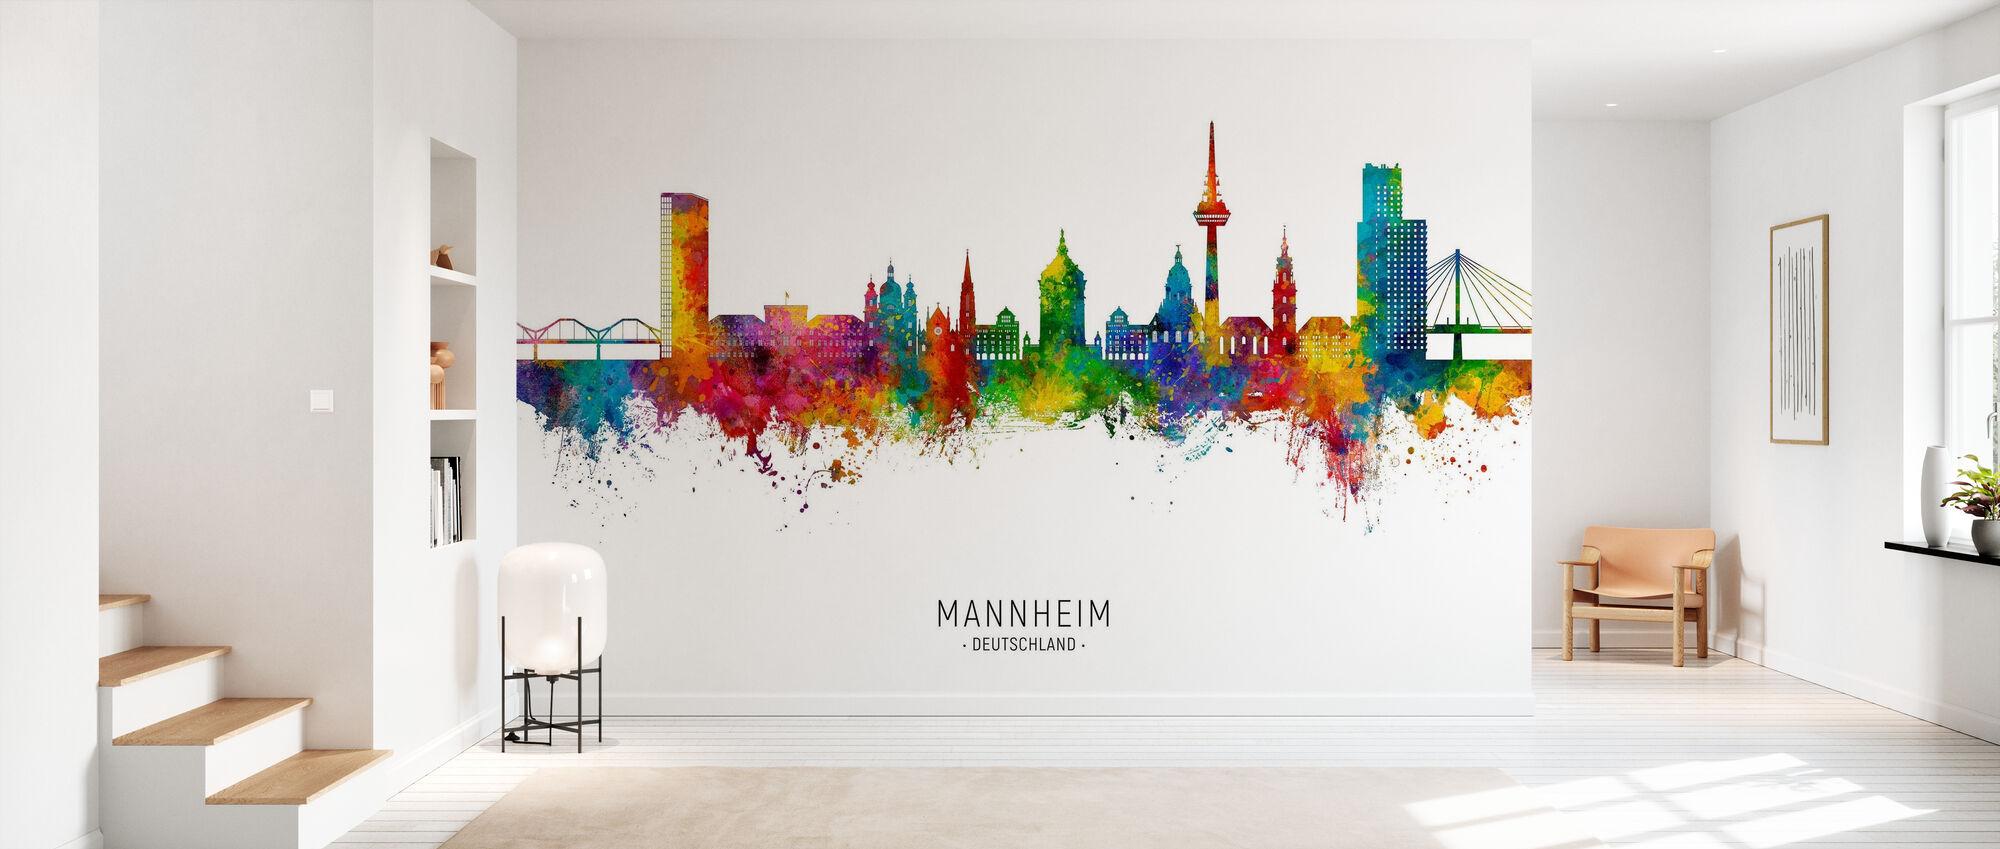 Mannheim Germany Skyline Decorate With A Wall Mural Photowall